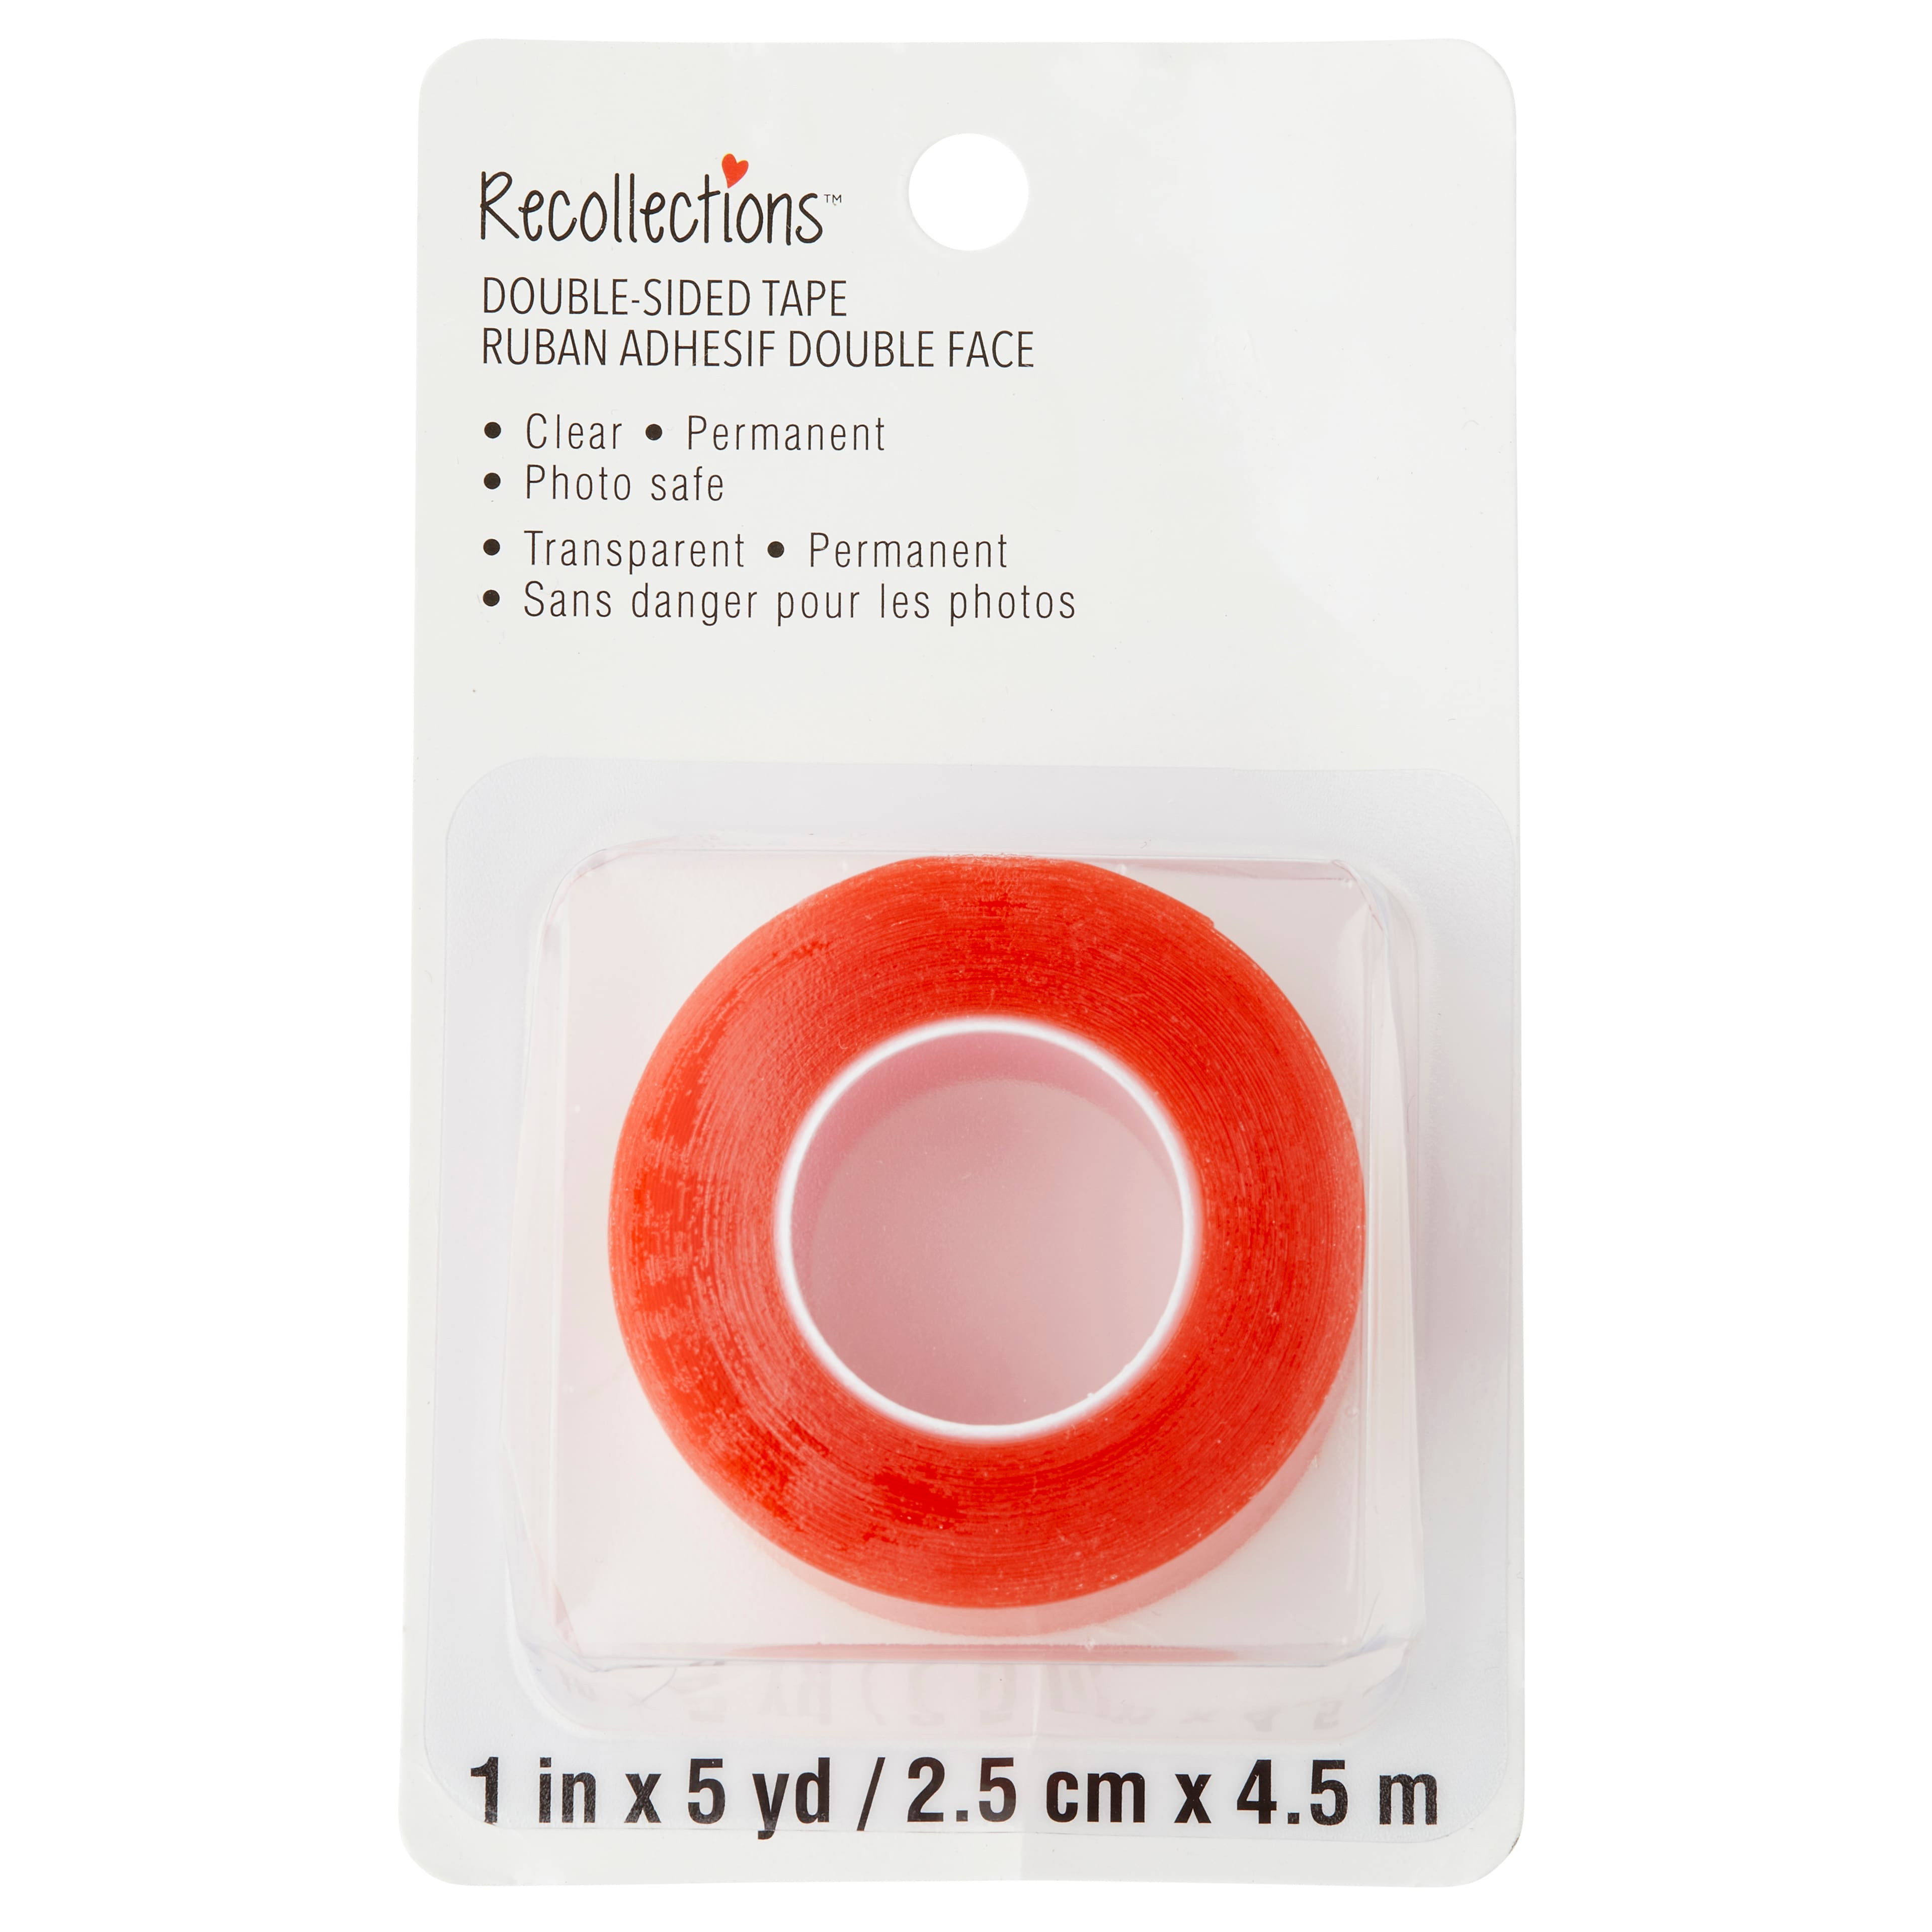 Glue Point 12mm, 2 Sided Adhesive Tape for Crafts, 1 Roll/100 pcs - Clear -  Bed Bath & Beyond - 37332347